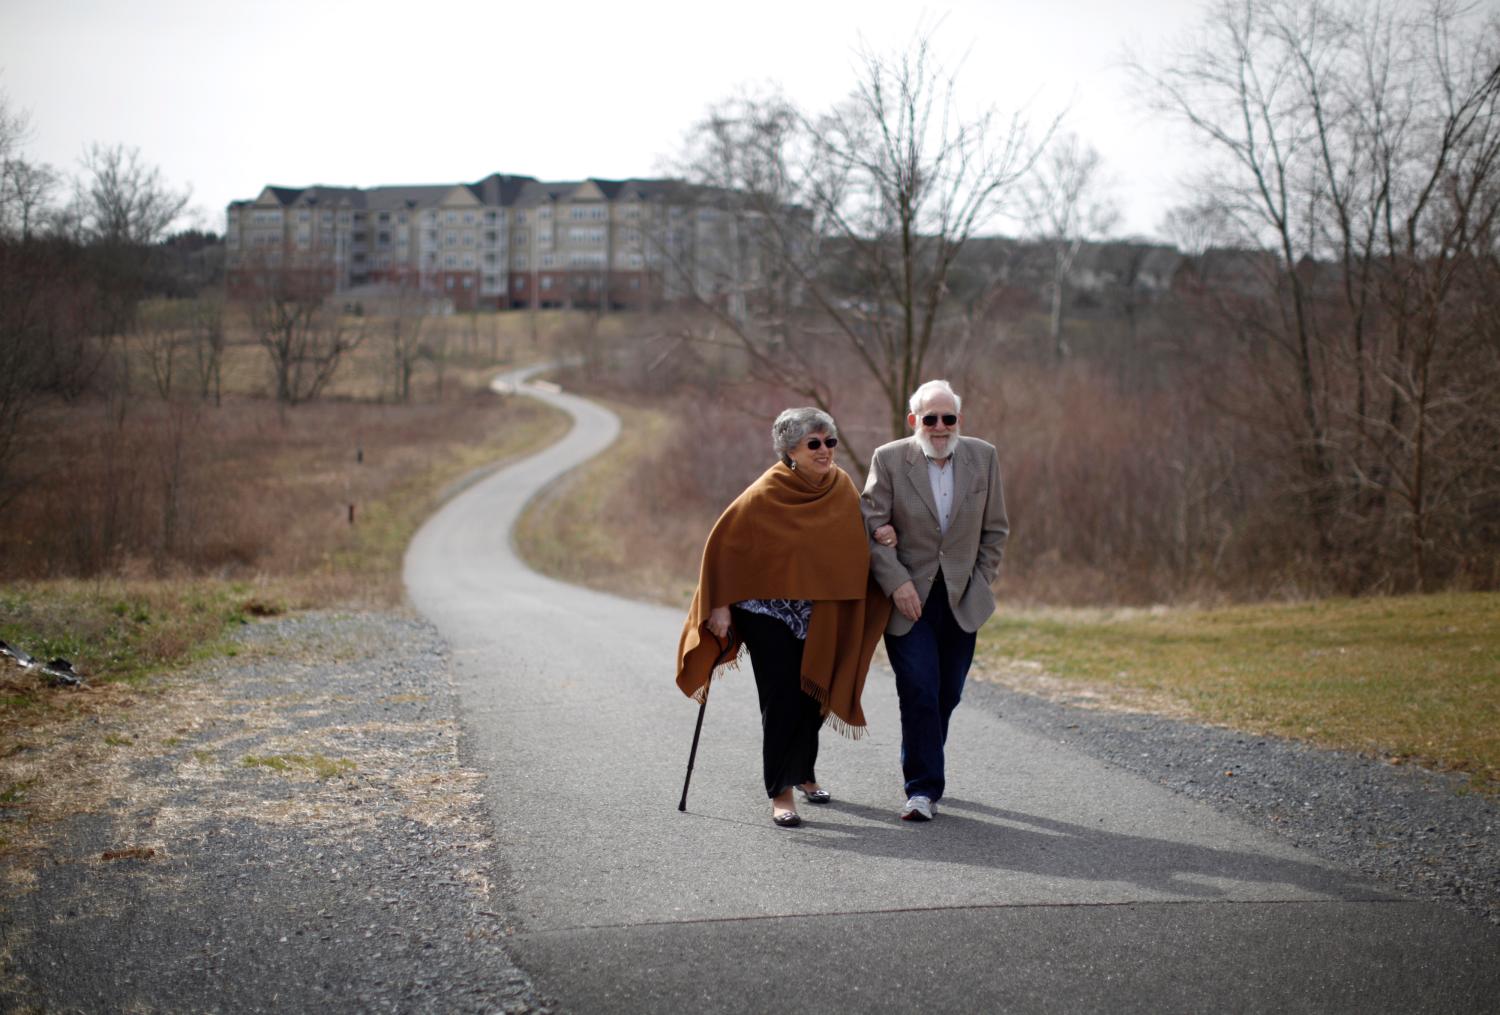 Retired couple Harvey and Cora Alter take a walk in their planned-community in semi-rural Frederick, Maryland March 2, 2012. Moving in retirement to save money - but not that far from previous homes, is a trend where retirees want to reduce the cost of living but not uproot their lives completely. Picture taken March 2, 2012. To match feature USA-RETIREES/     REUTERS/Jason Reed   (UNITED STATES - Tags: SOCIETY BUSINESS) - GM1E839043S01